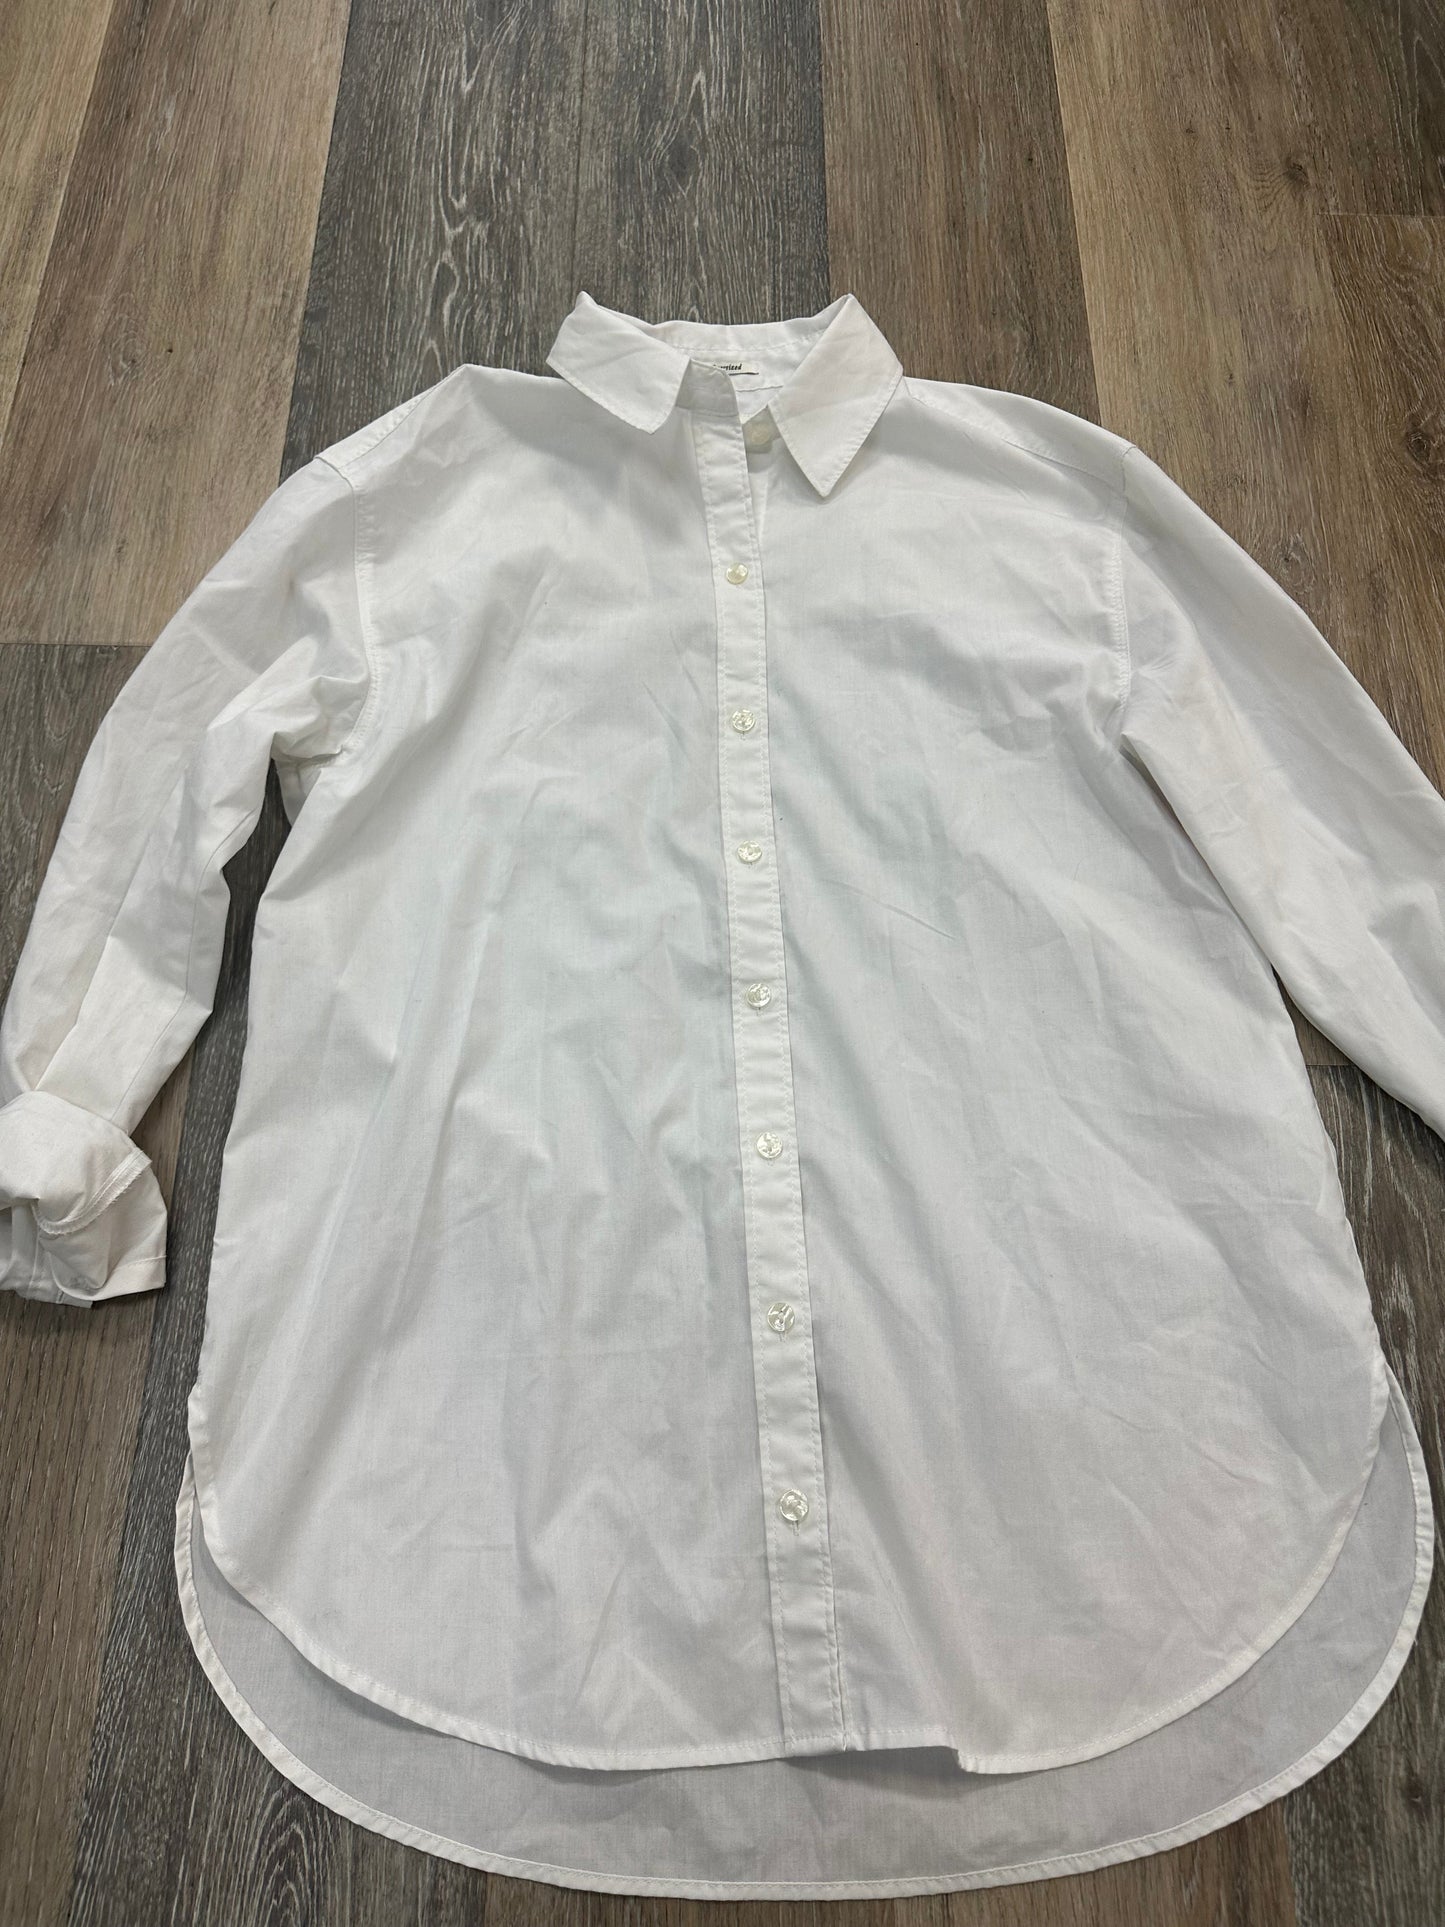 White Blouse Long Sleeve Abercrombie And Fitch, Size Xs